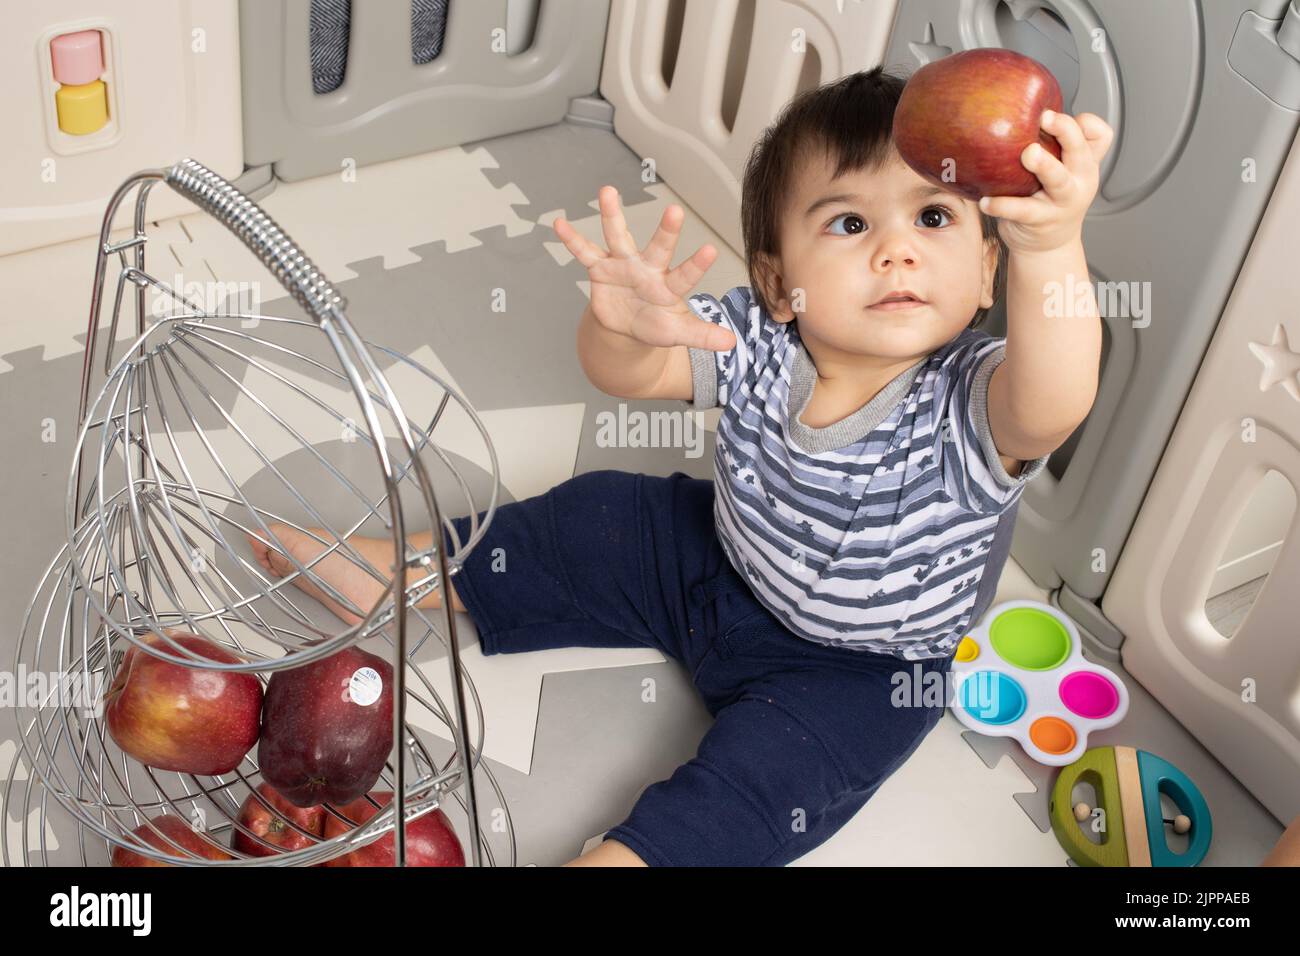 11 month old baby boy at home holding up apple with one hand and looking at it Stock Photo